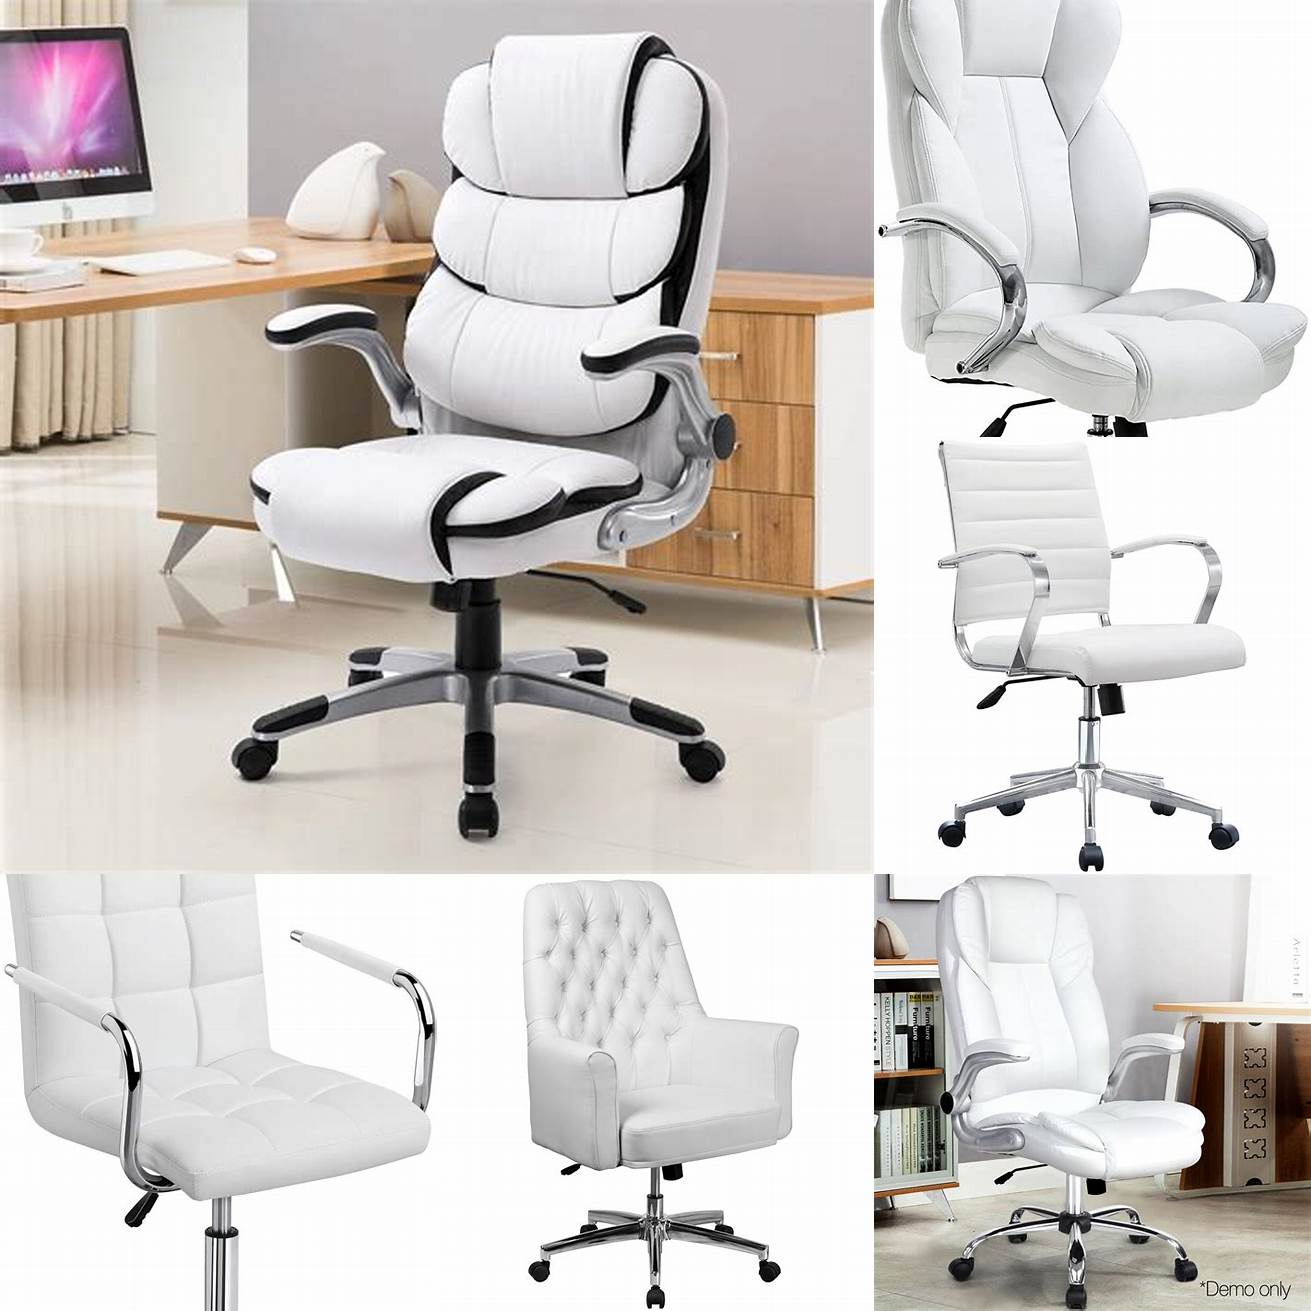 A white leather office chair with adjustable features